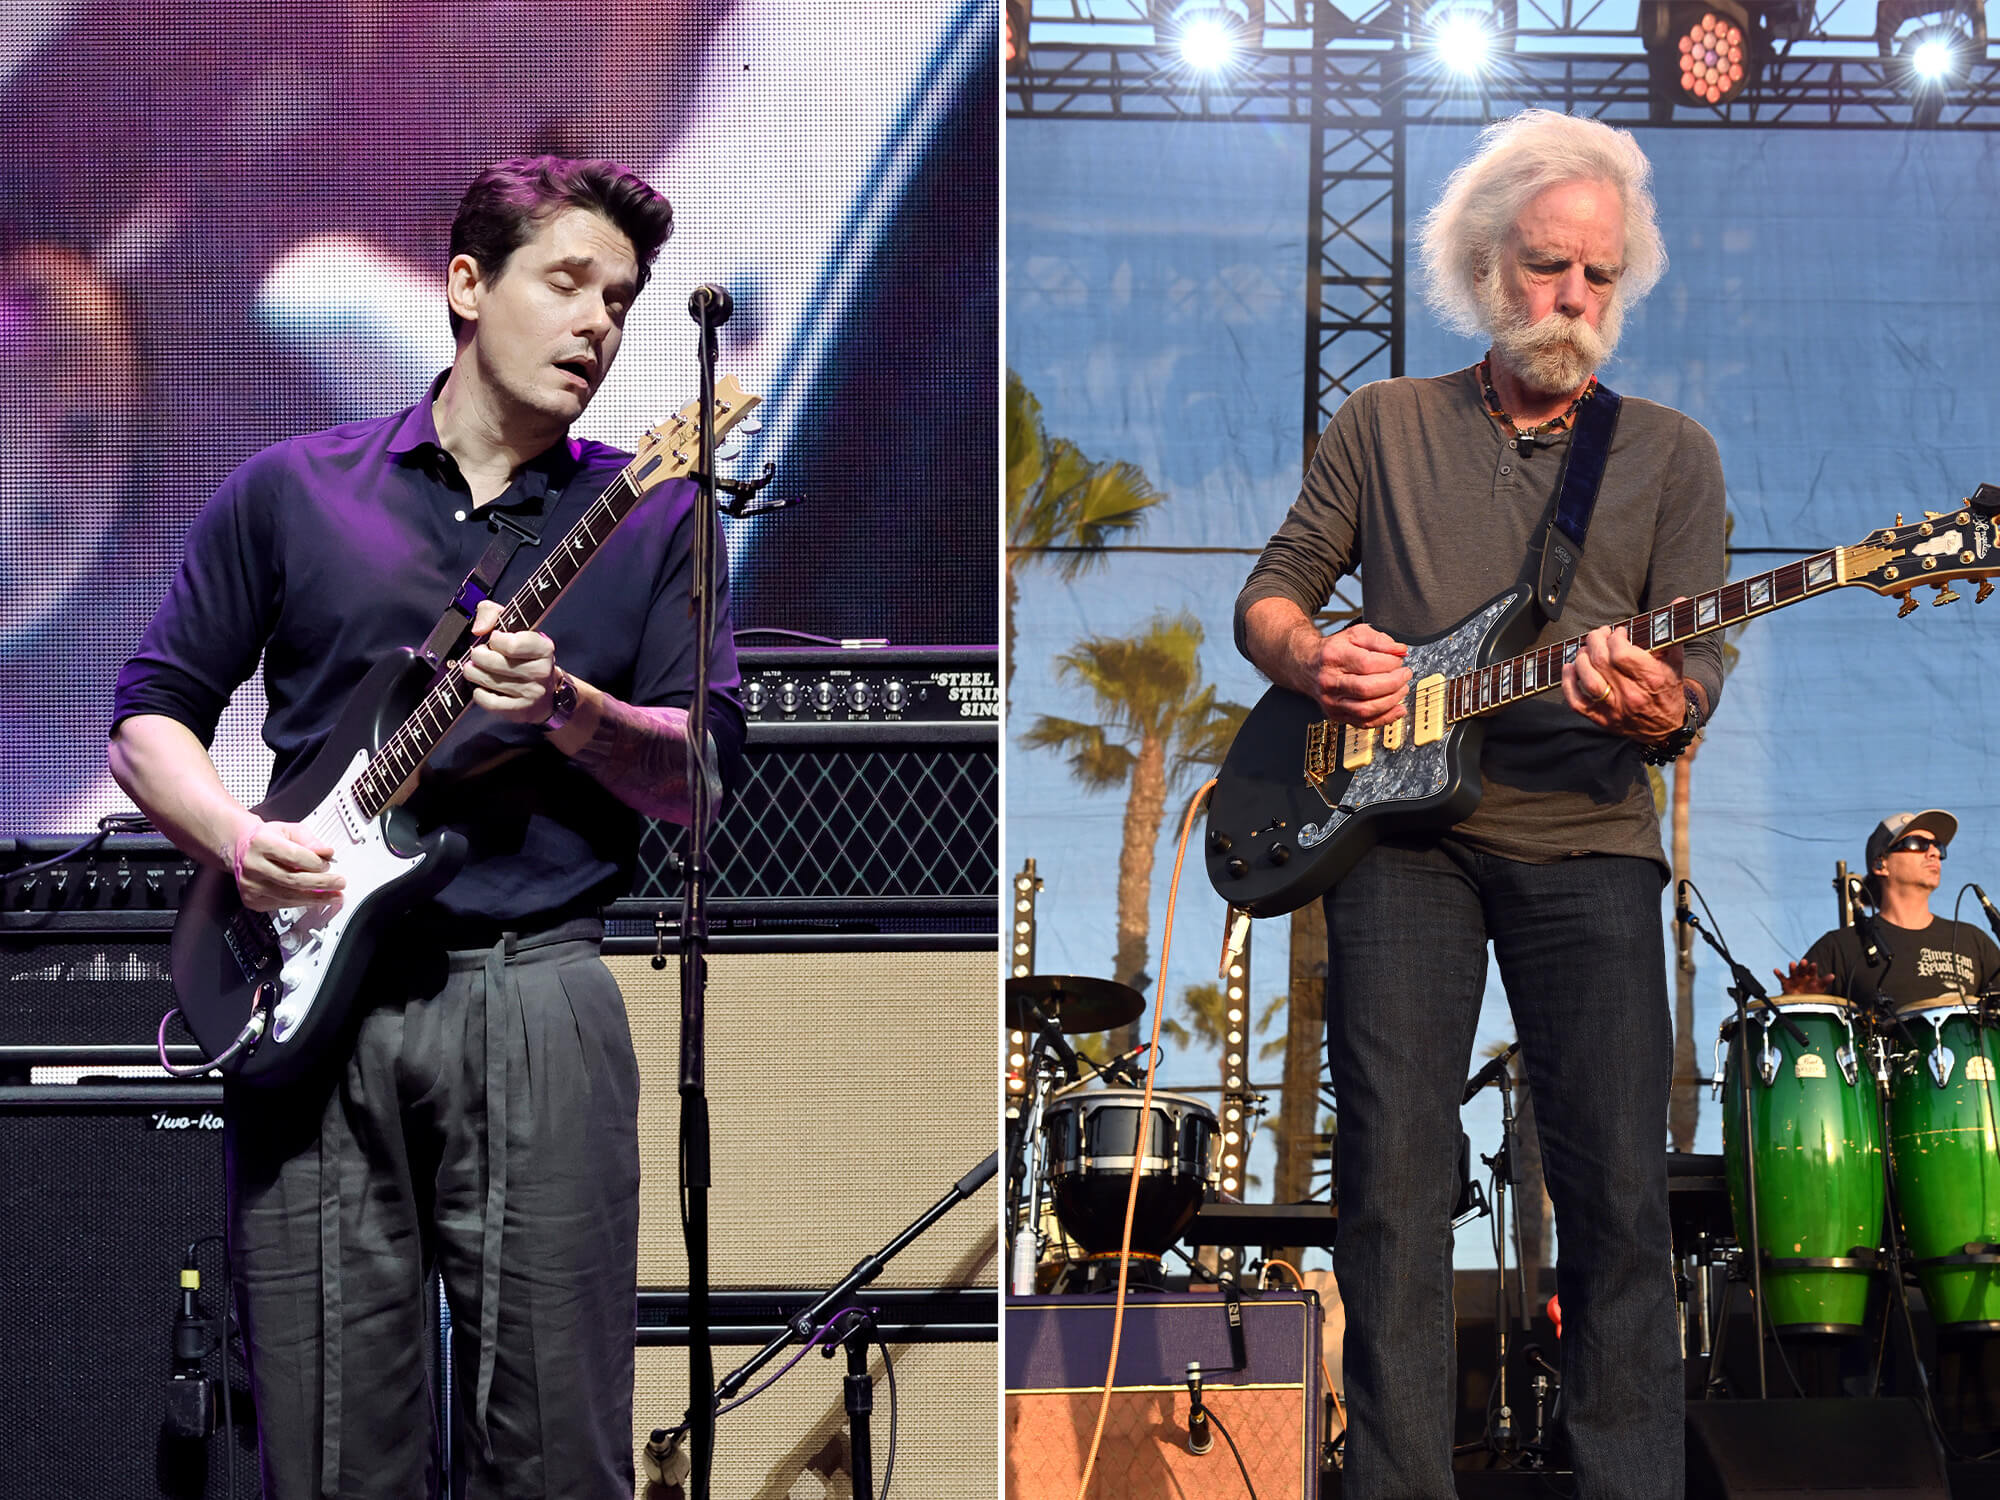 John Mayer (left) playing guitar on stage, he has his eyes closed. Bob Weir (right) of Grateful Dead. He is also playing guitar on stage and is looking down at his instrument as he plays.